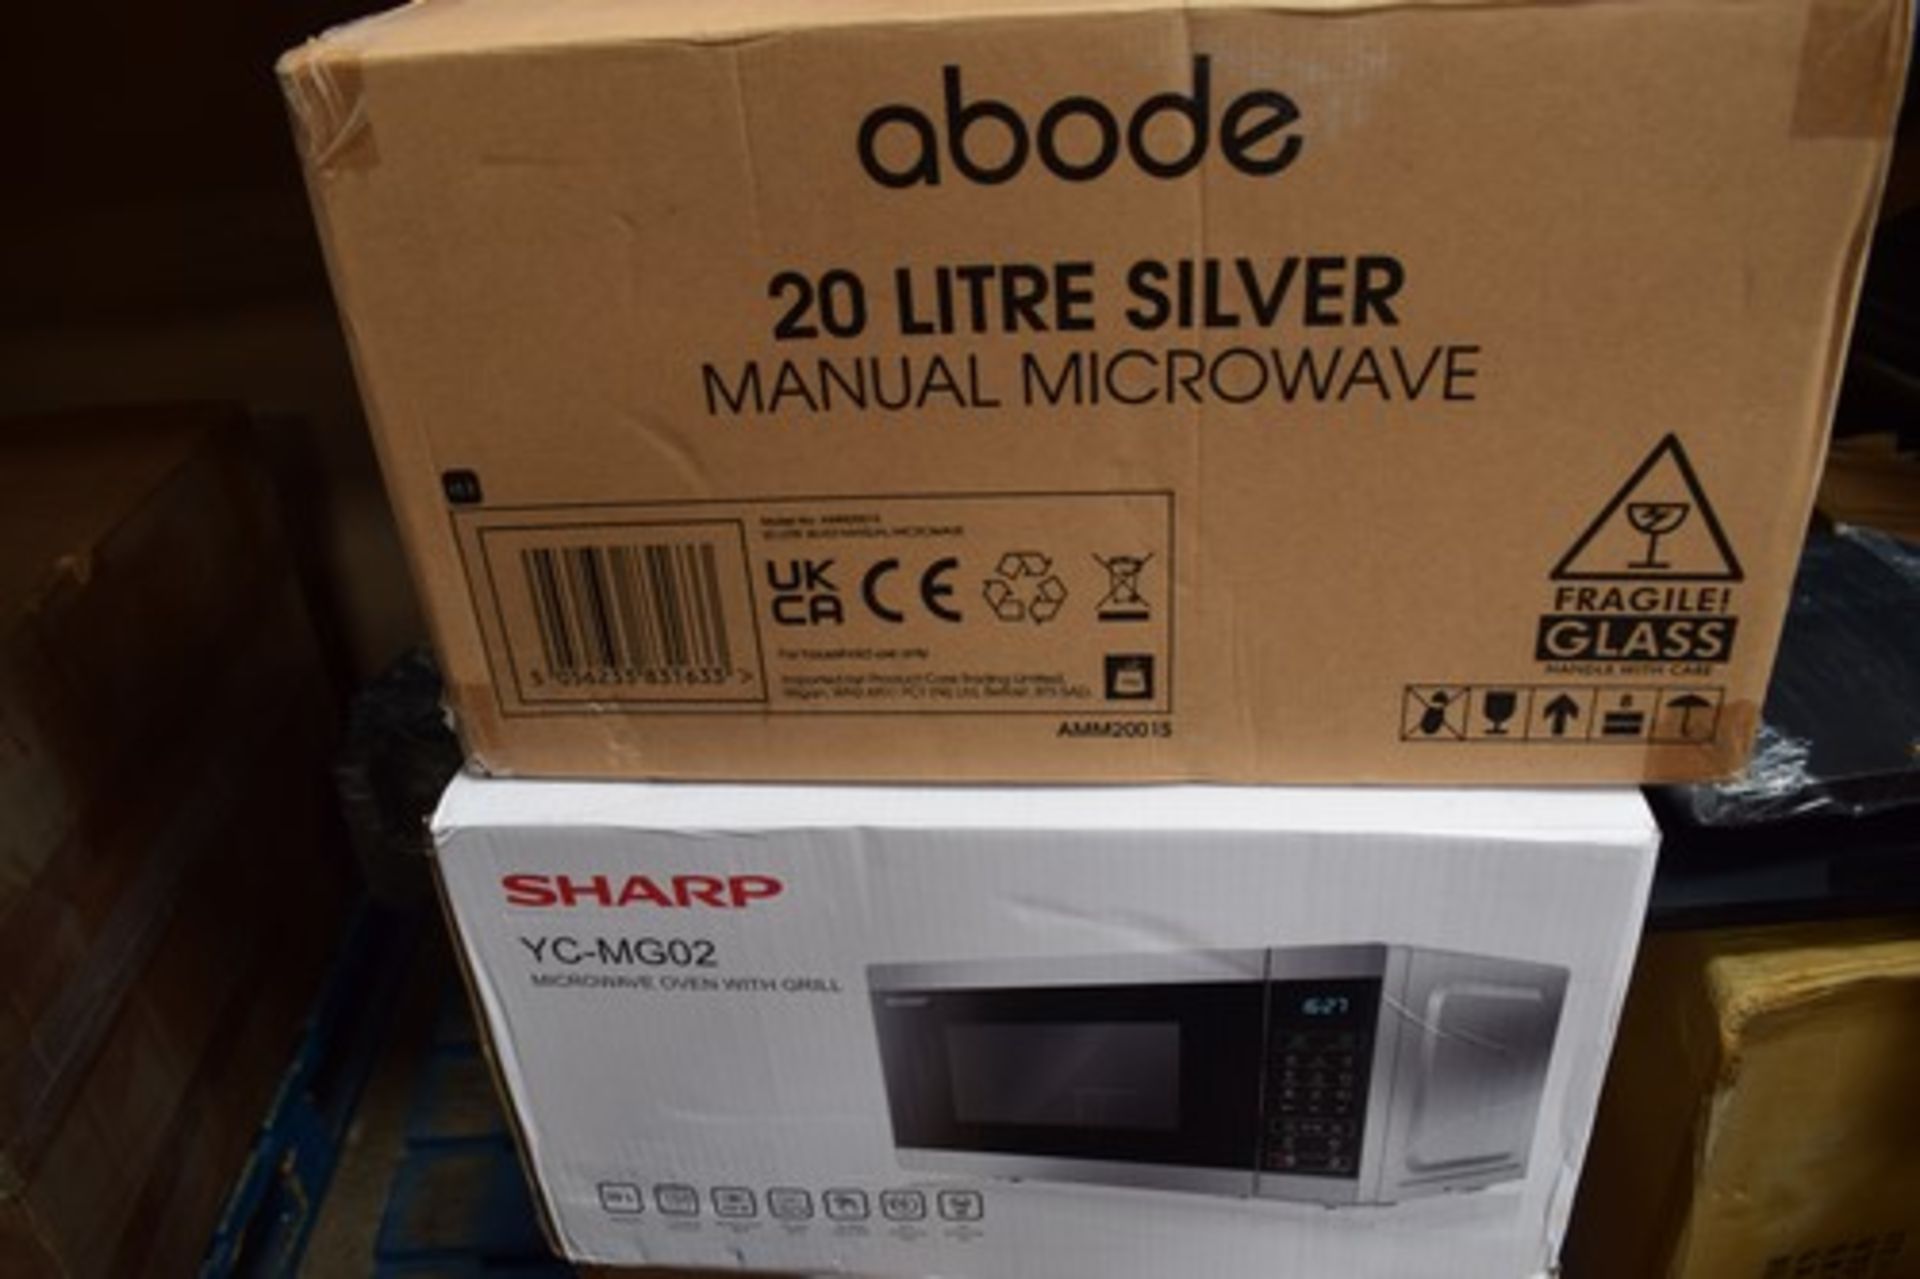 1 x Sharp microwave oven with grill, Model YC-MG02 and 1 x Abode 20 litre silver microwave - New - Image 2 of 2